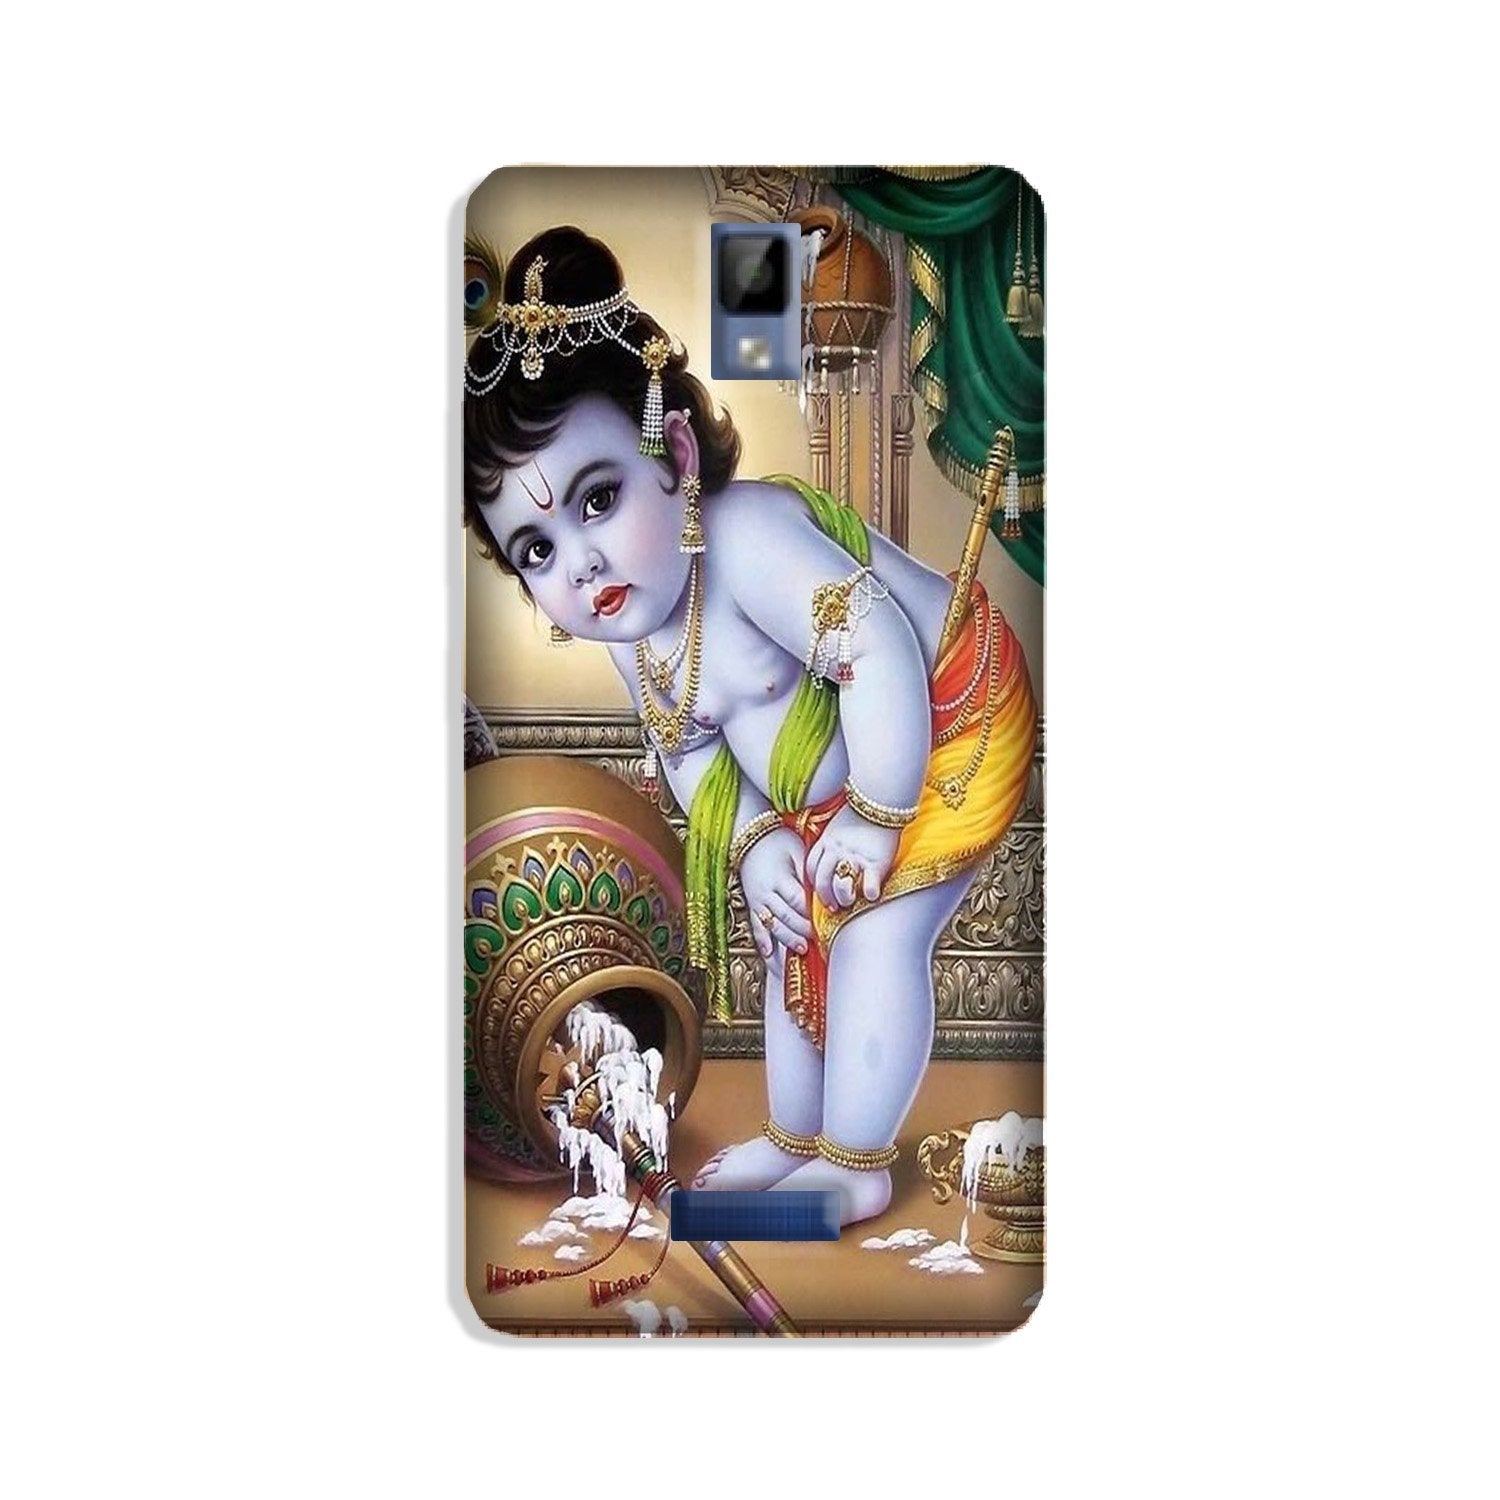 Bal Gopal2 Case for Gionee P7